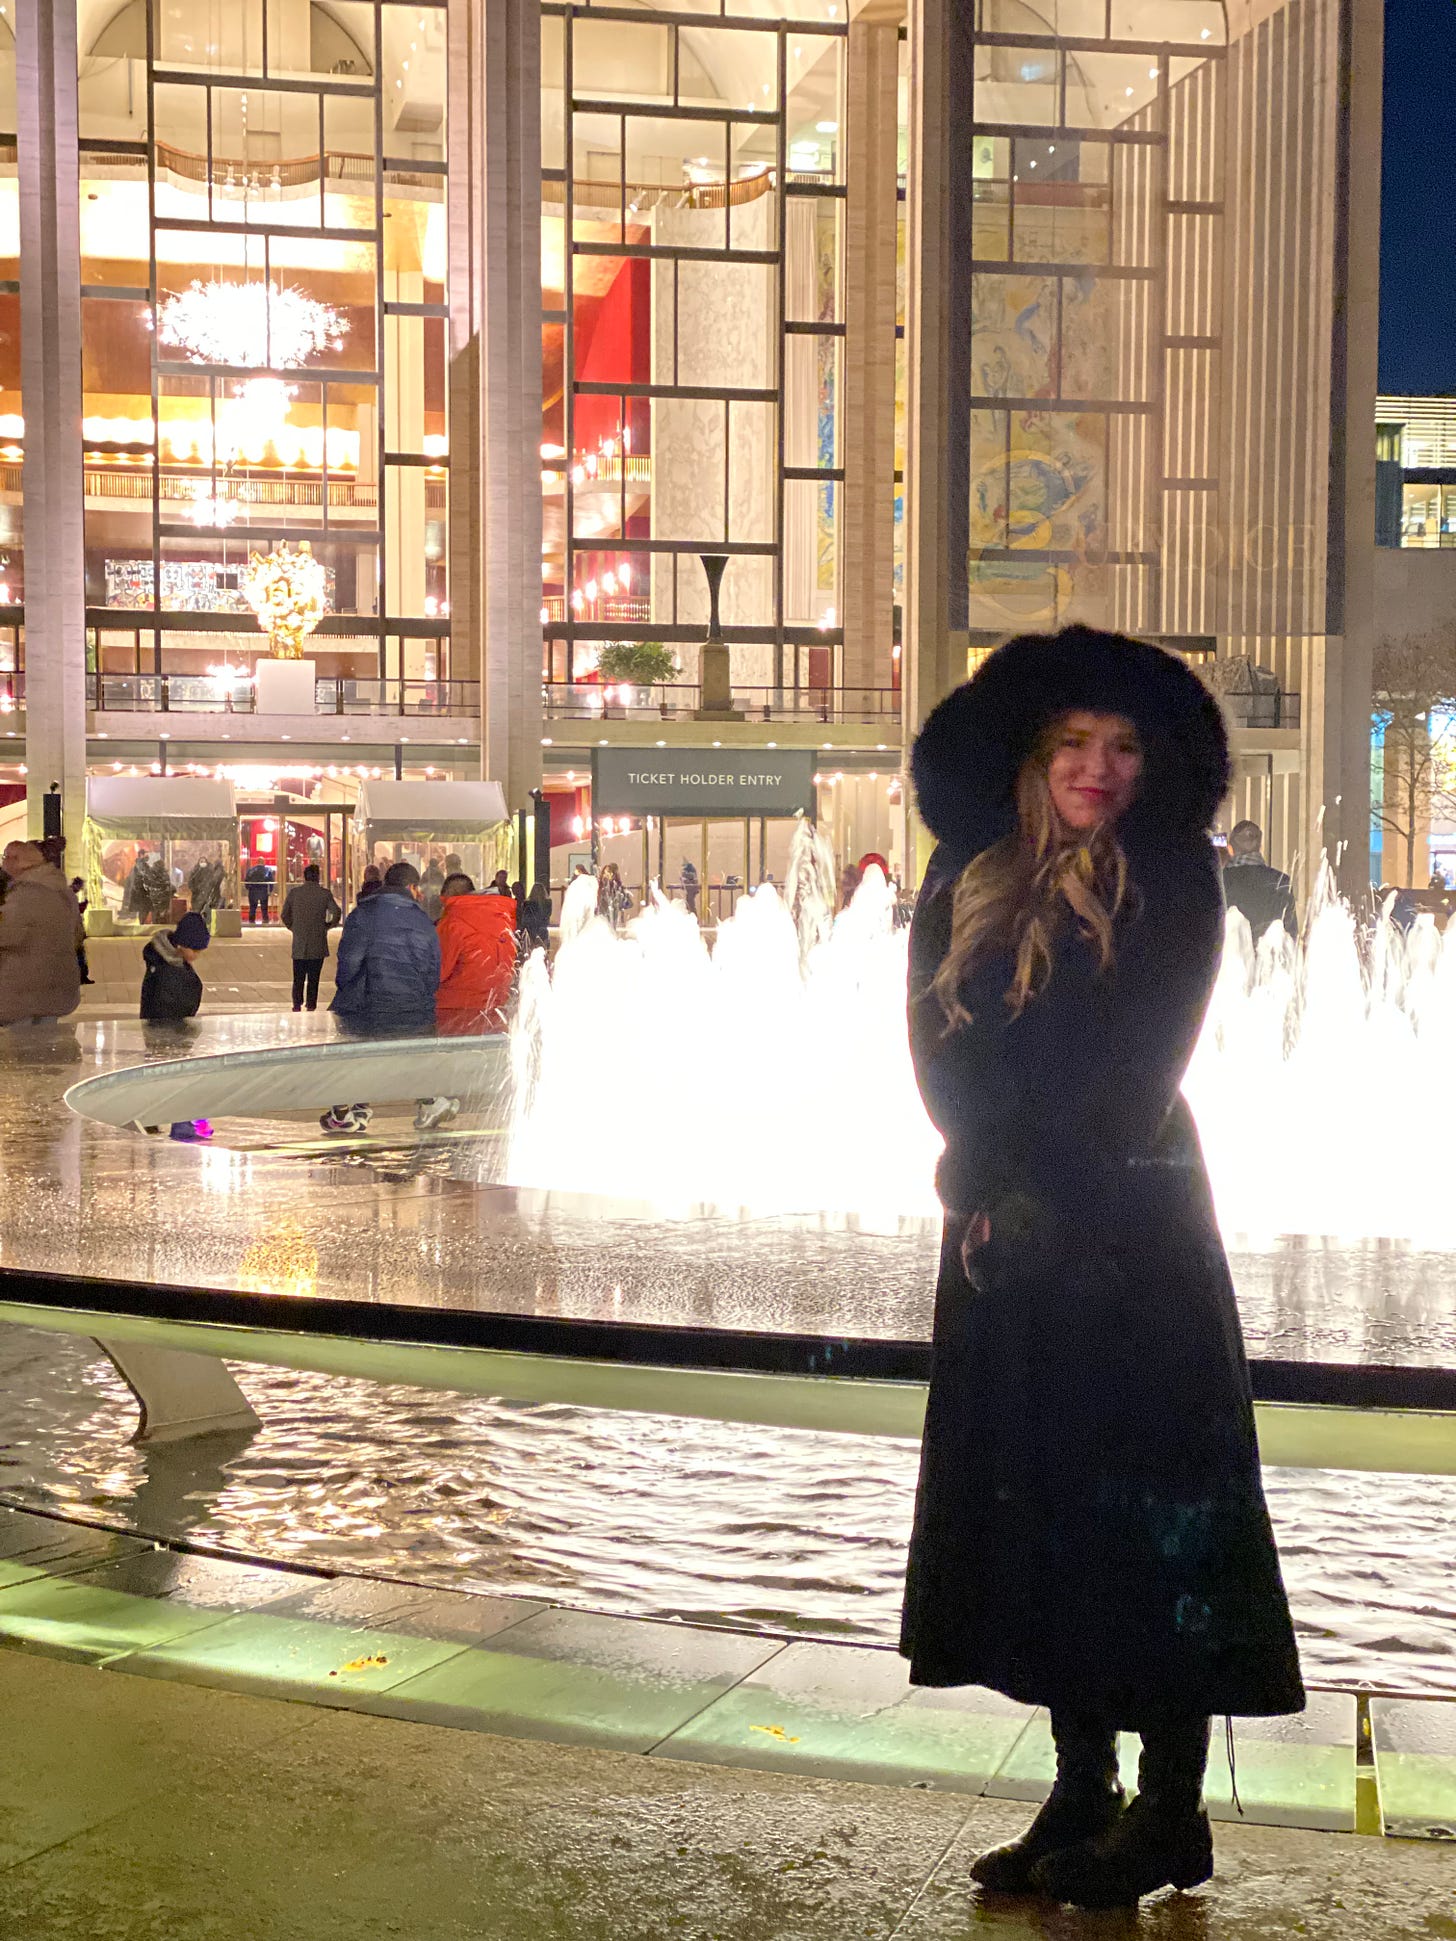 I went to the Nutcracker ballet with my high school friend Kristen and she shot this photo of me in front of the Lincoln Center's fountain at 10:22pm after we left. It was a magical evening.